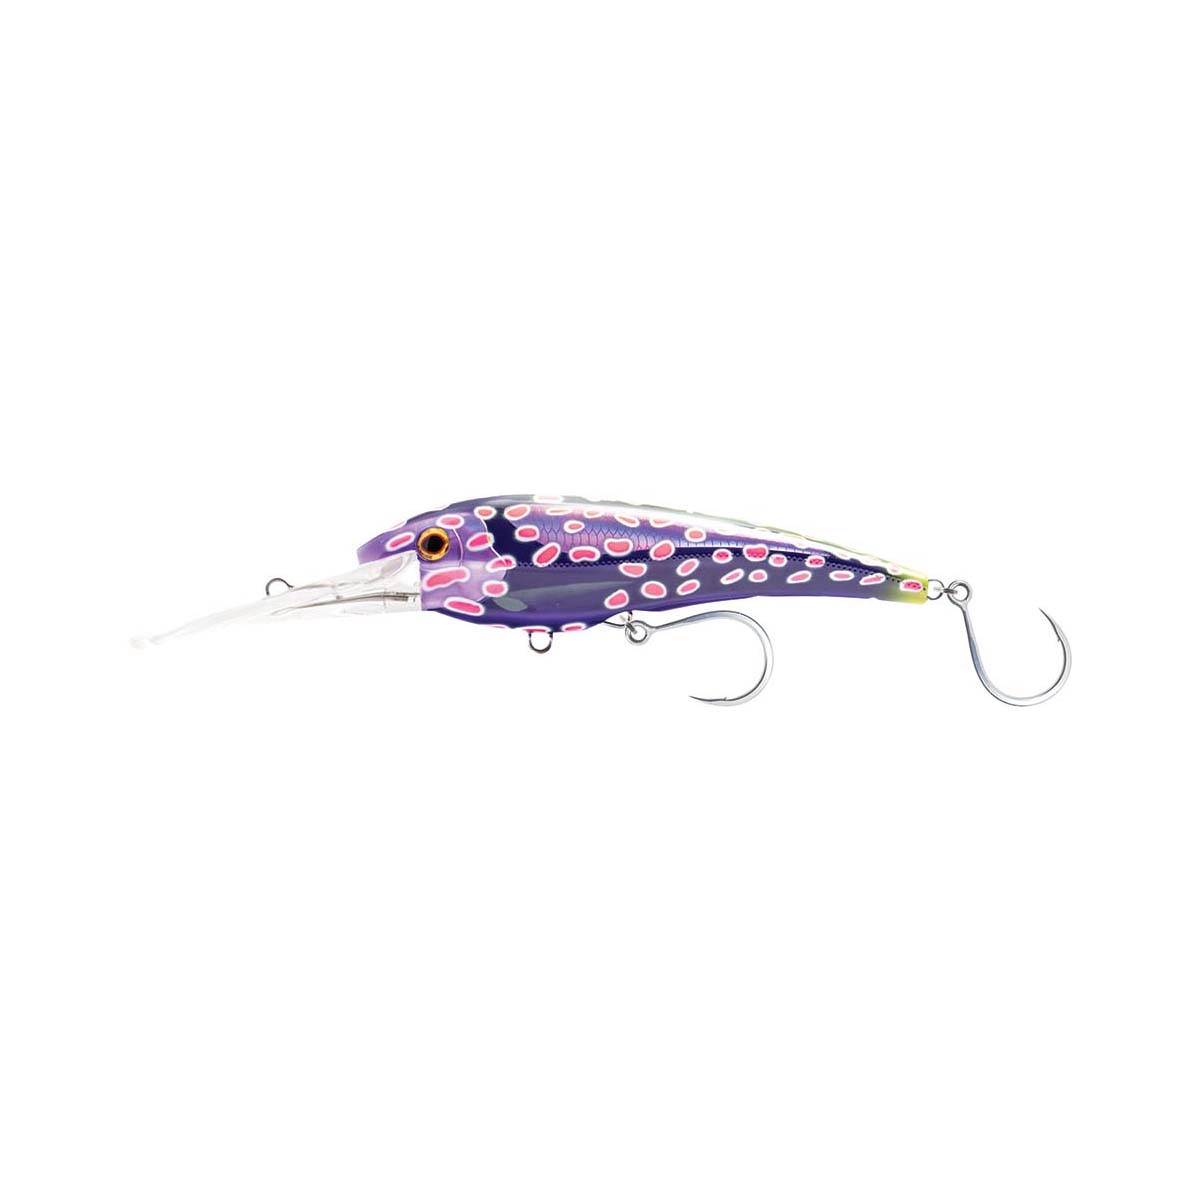 Nomad DTX Minnow Hard Body Lure 16.5cm S Nuclear Coral Trout @ Club BCF